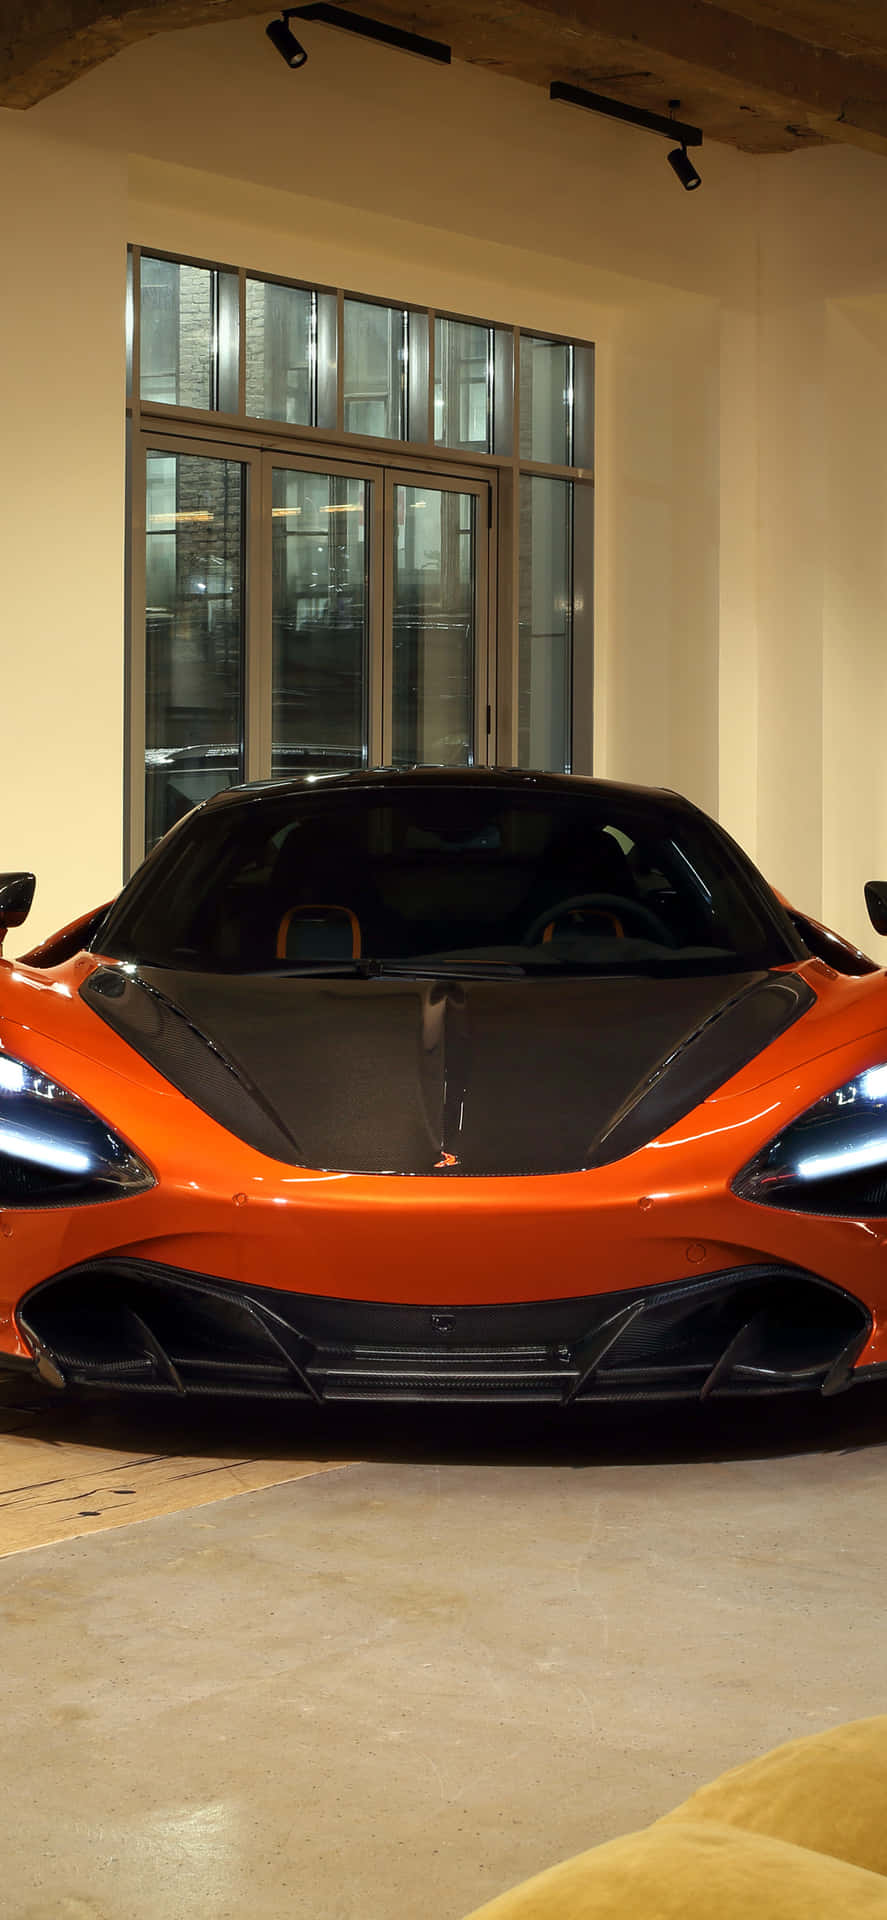 The Epic Power of Style: the Iphone Xs Mclaren 720s